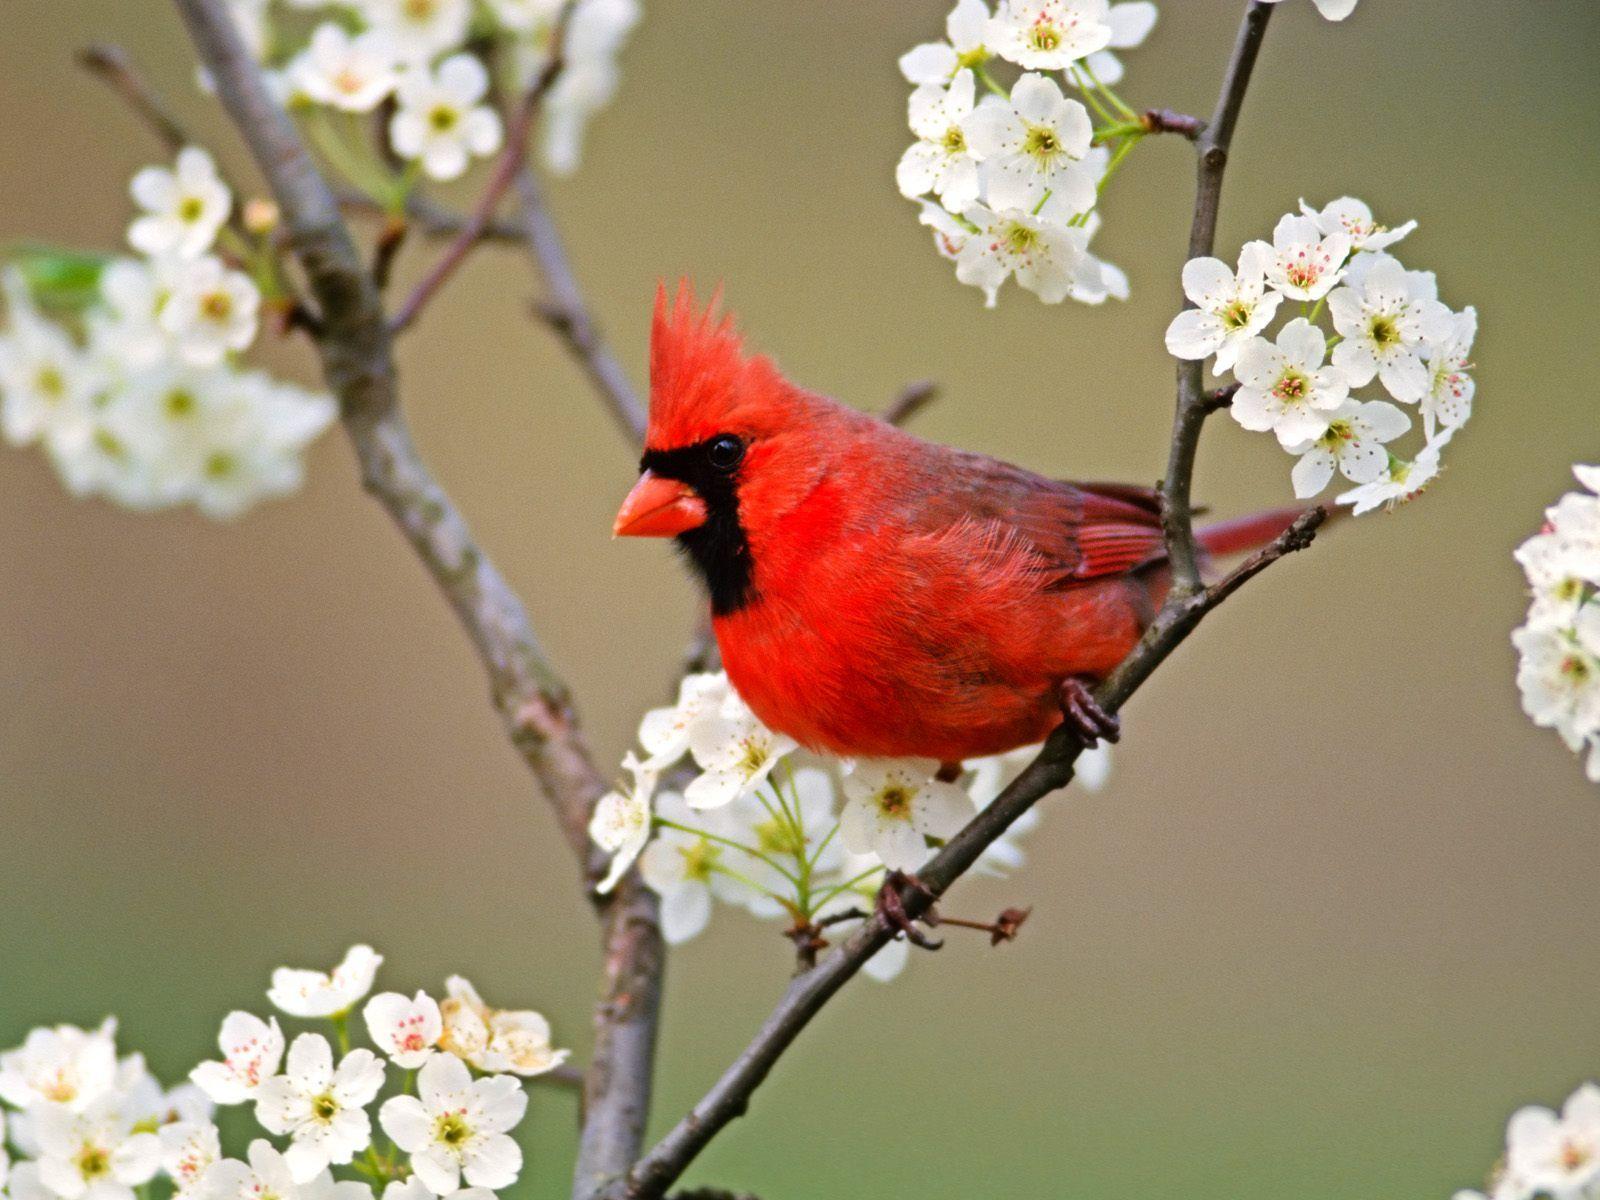 flowers for flower lovers.: Flowers and birds beautiful wallpaper